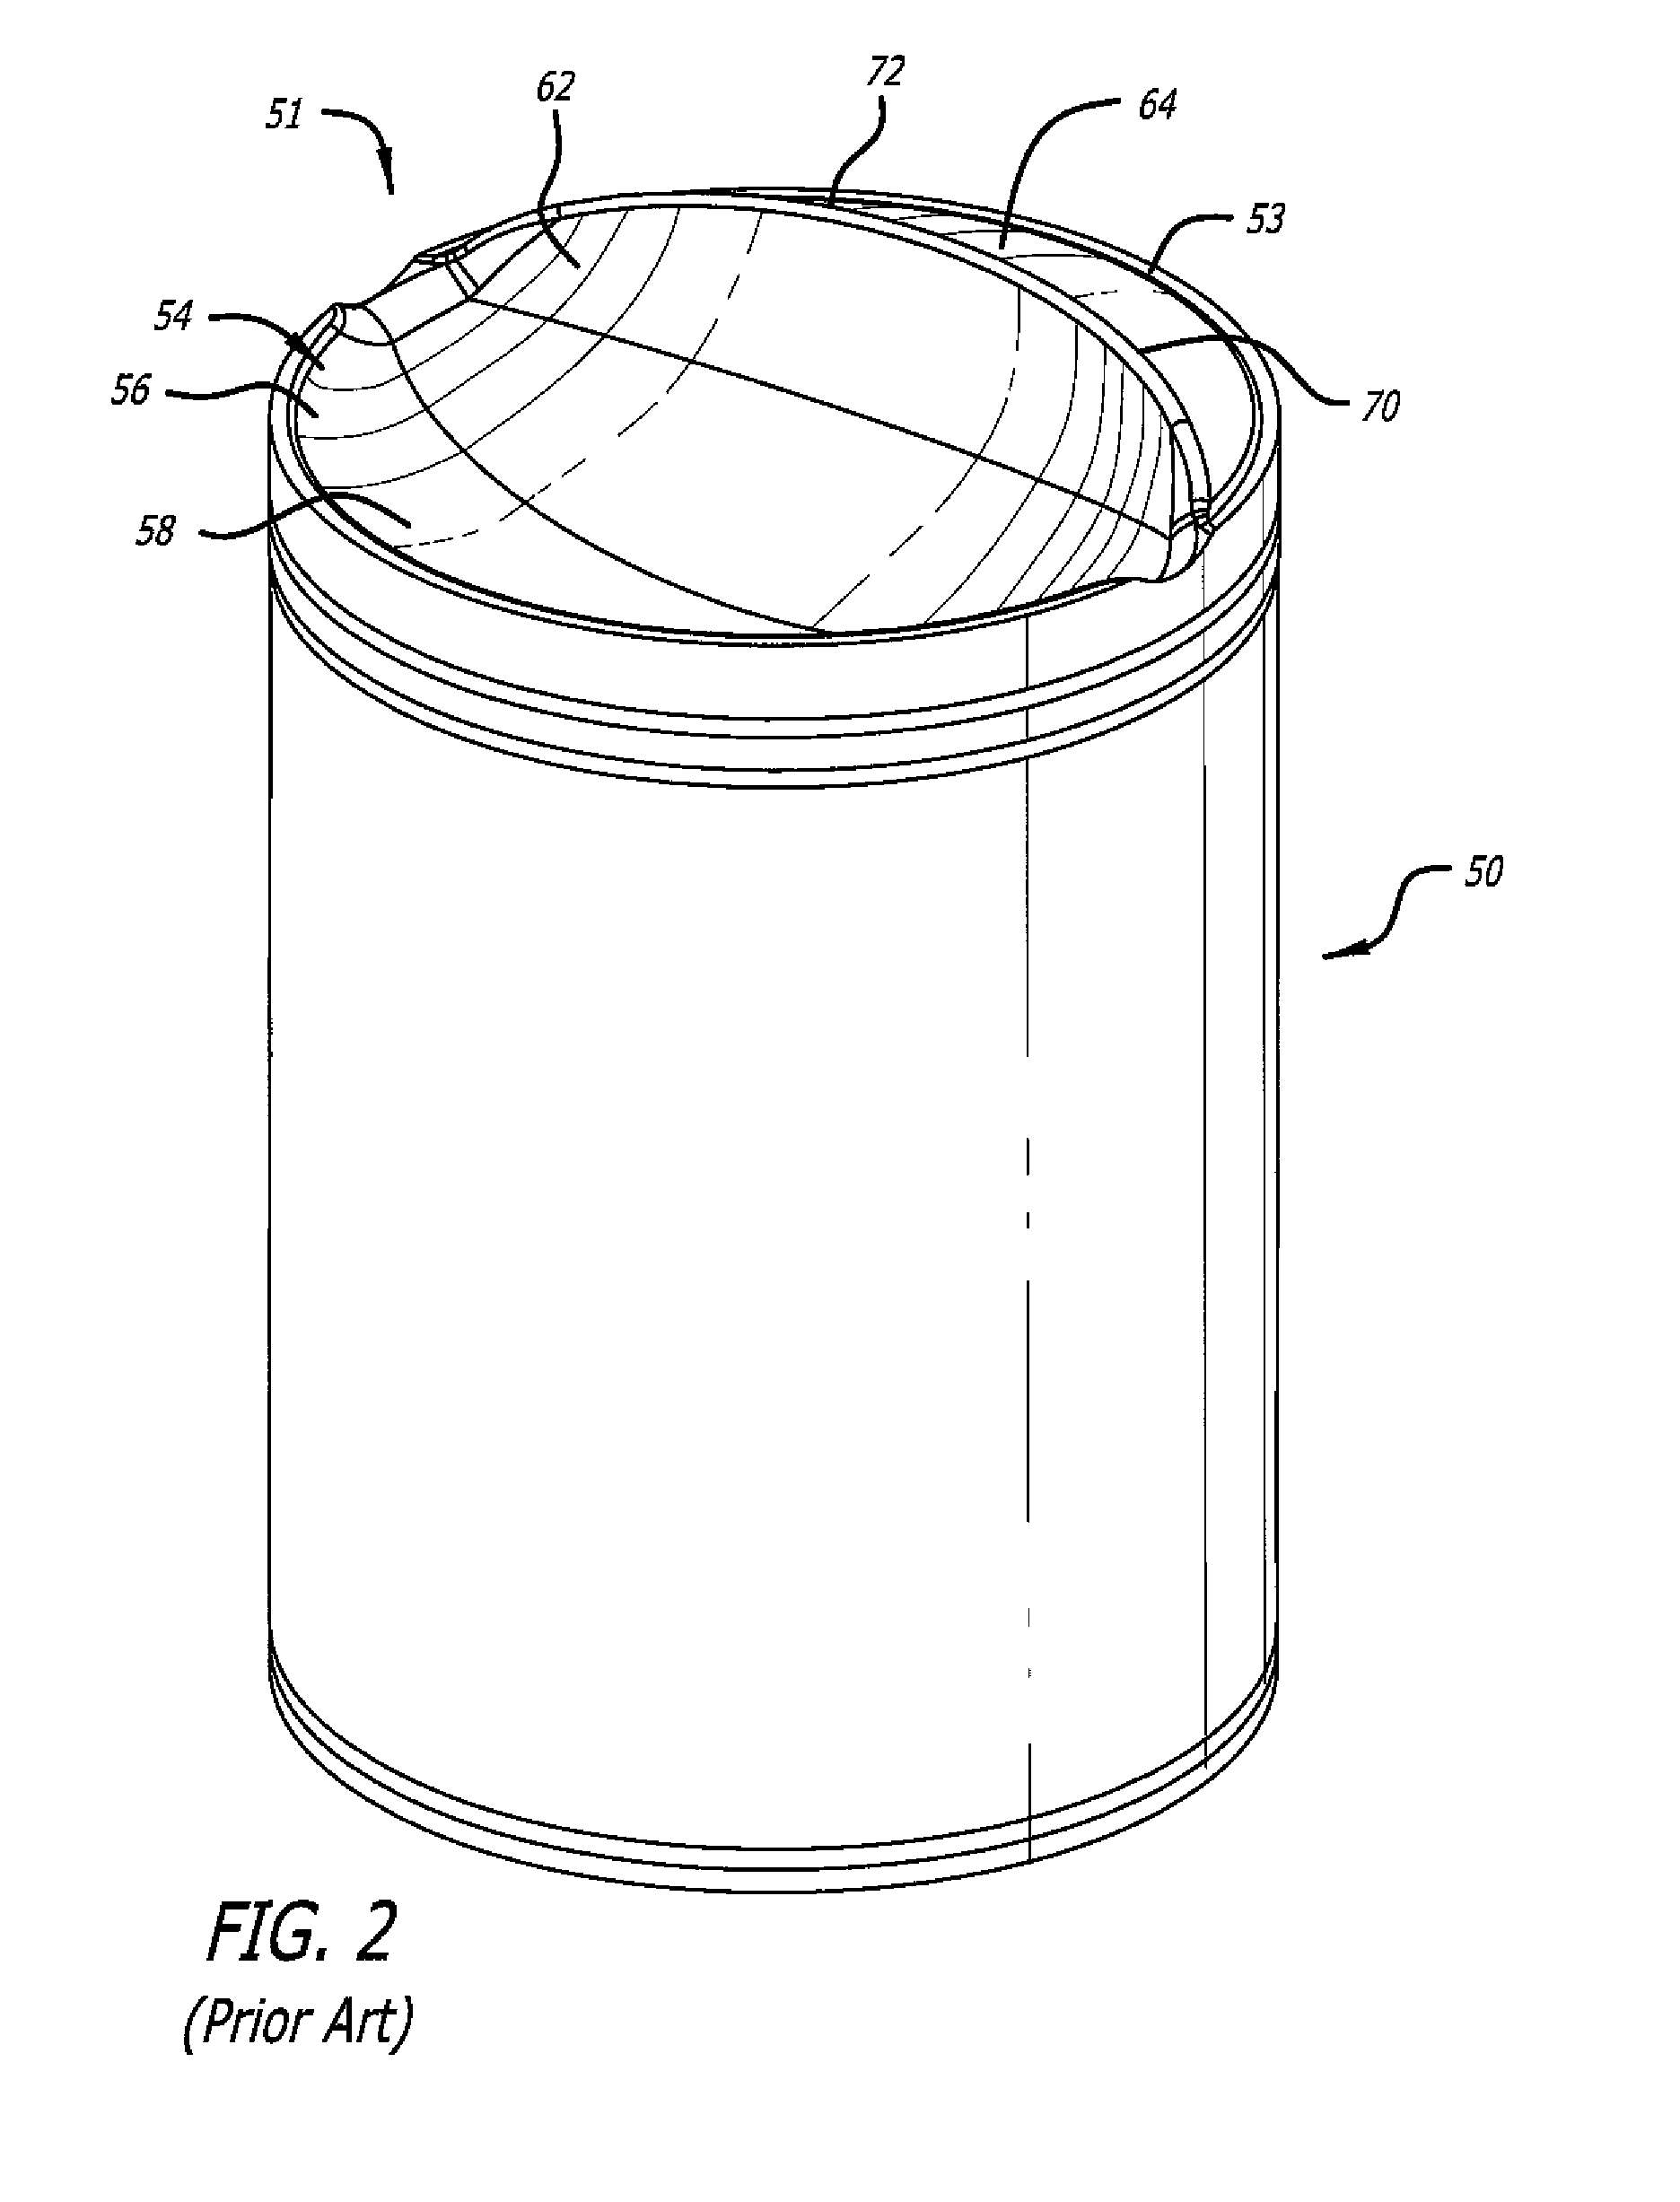 Skewed Combustion Chamber For Opposed-Piston Engines